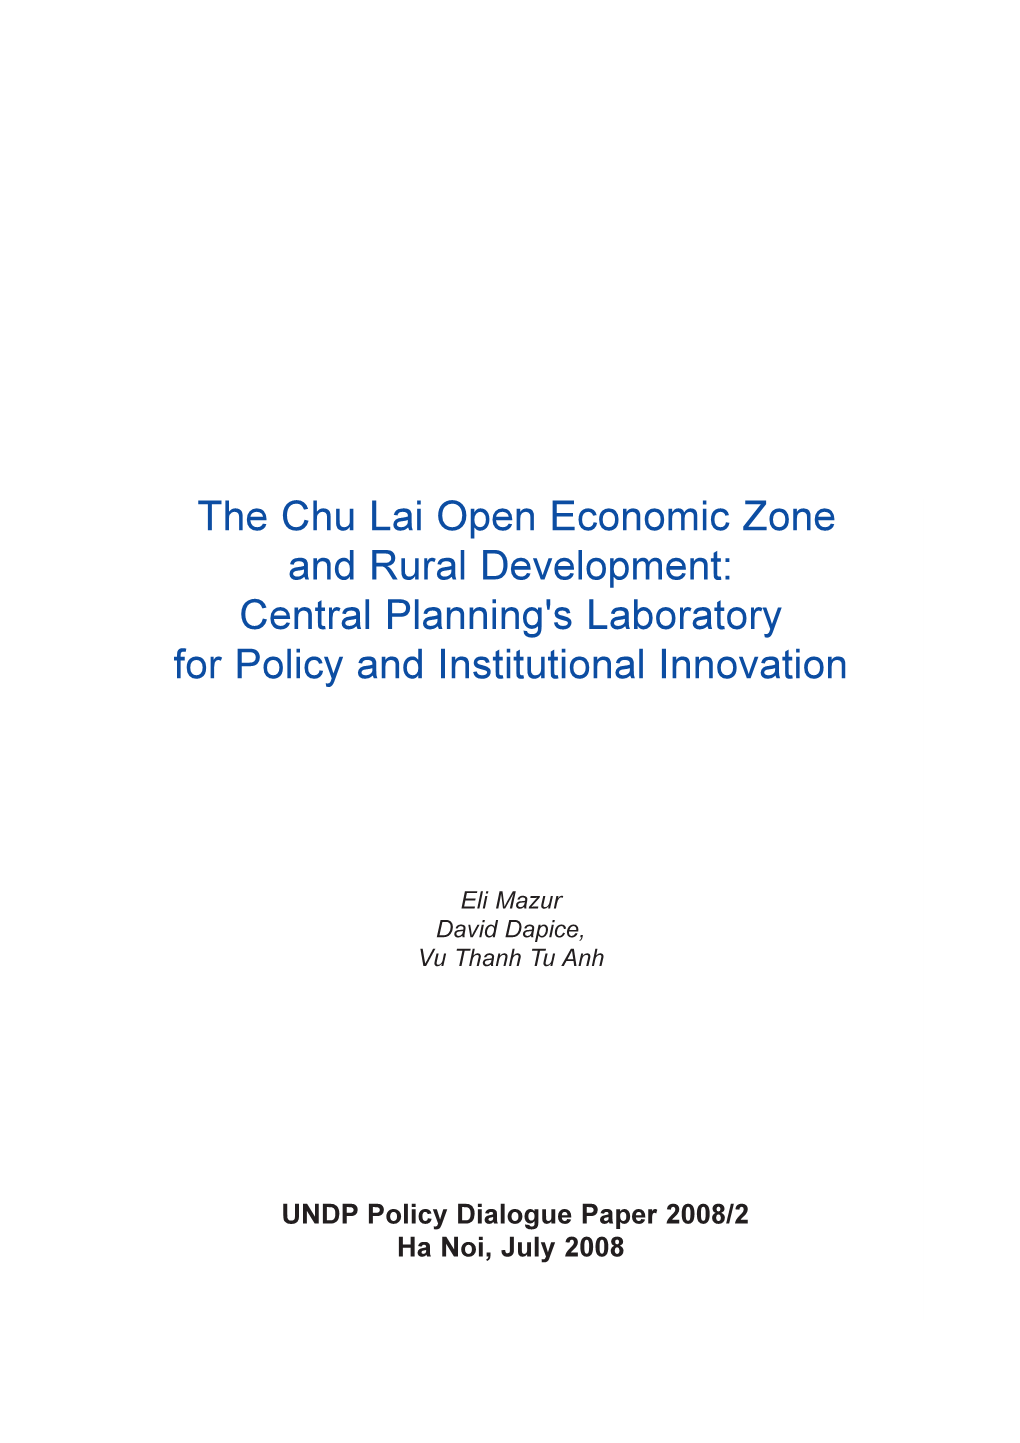 The Chu Lai Open Economic Zone and Rural Development: Central Planning's Laboratory for Policy and Institutional Innovation